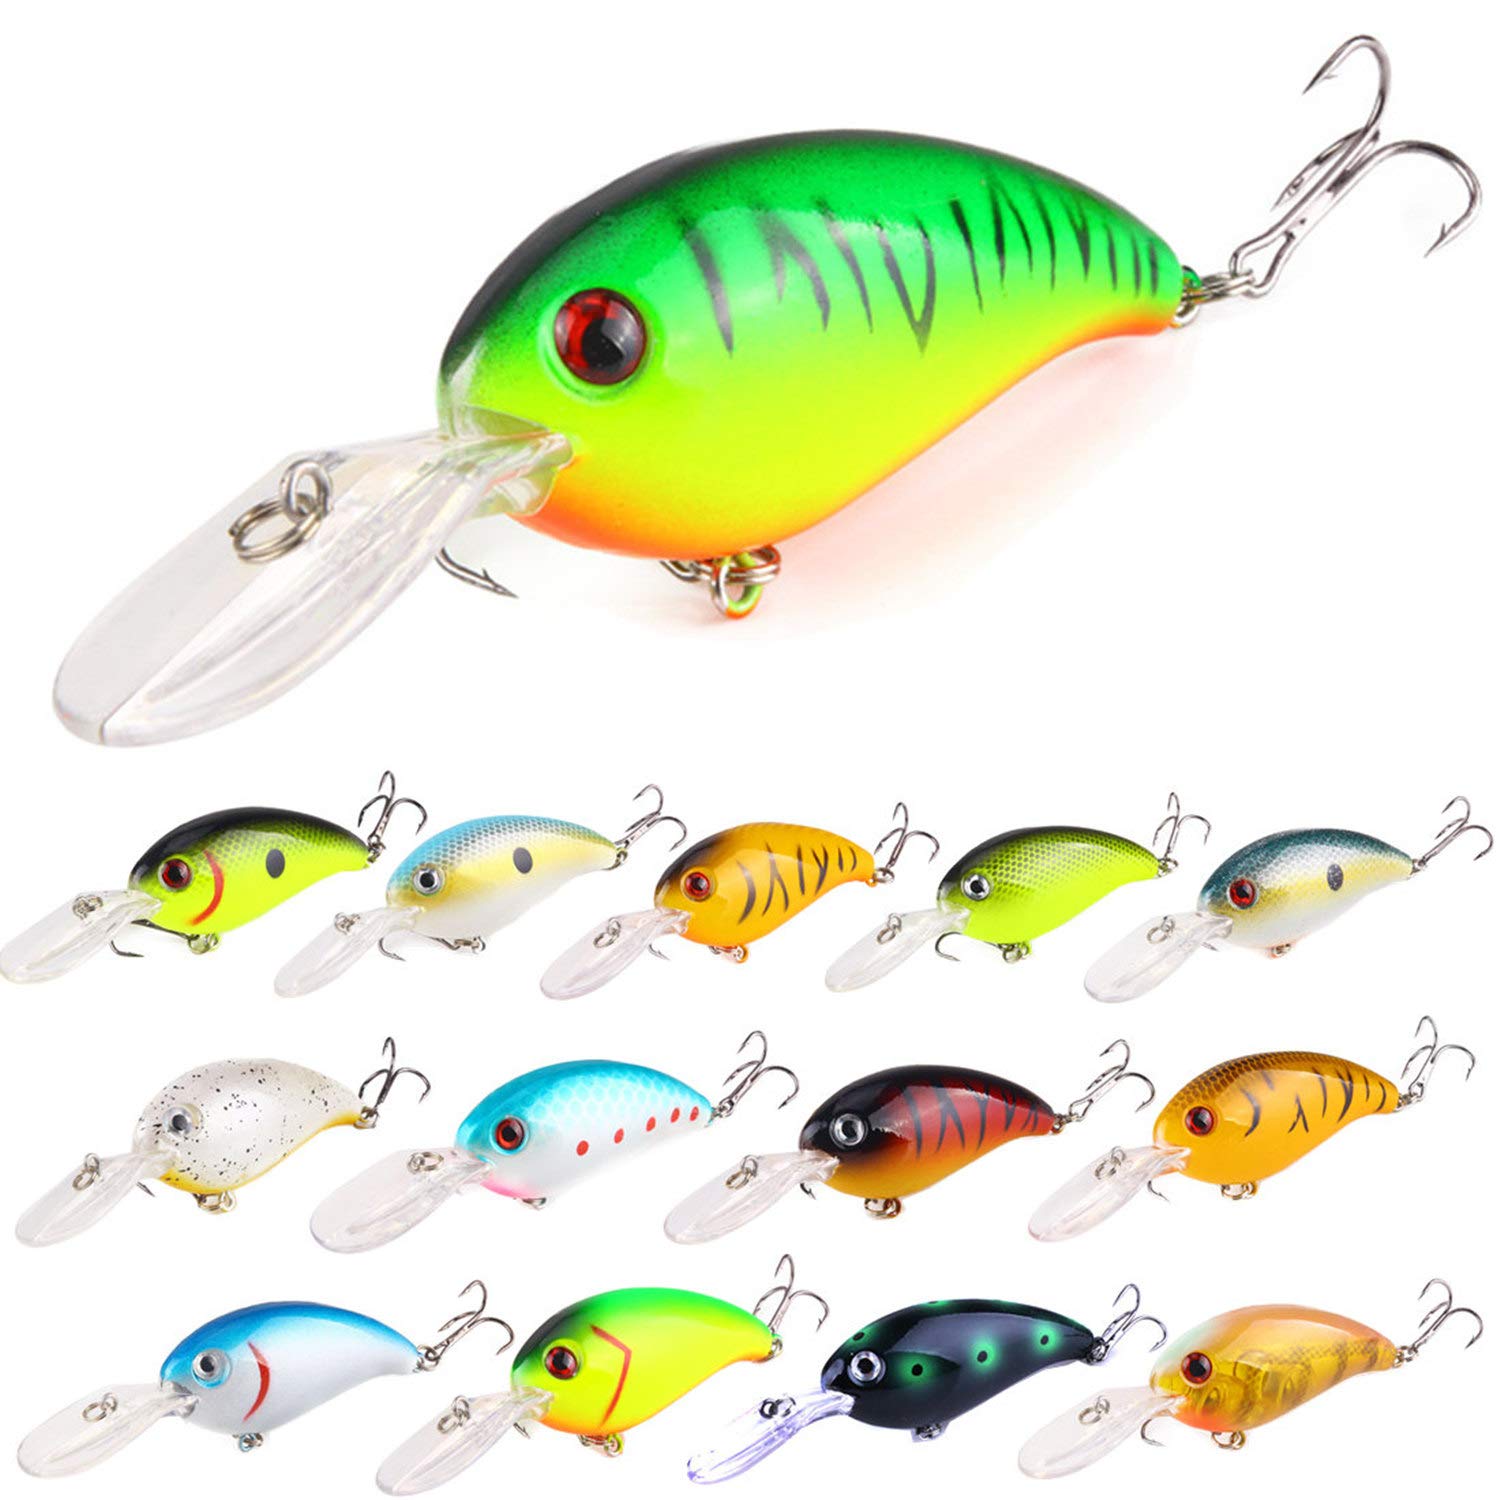 Happy Date Metal Bass Fishing Lures Set, Diving Wobblers Artificial Bait  with 3D Eyes, Lifelike Swimbait for Freshwater Saltwater Fishing 